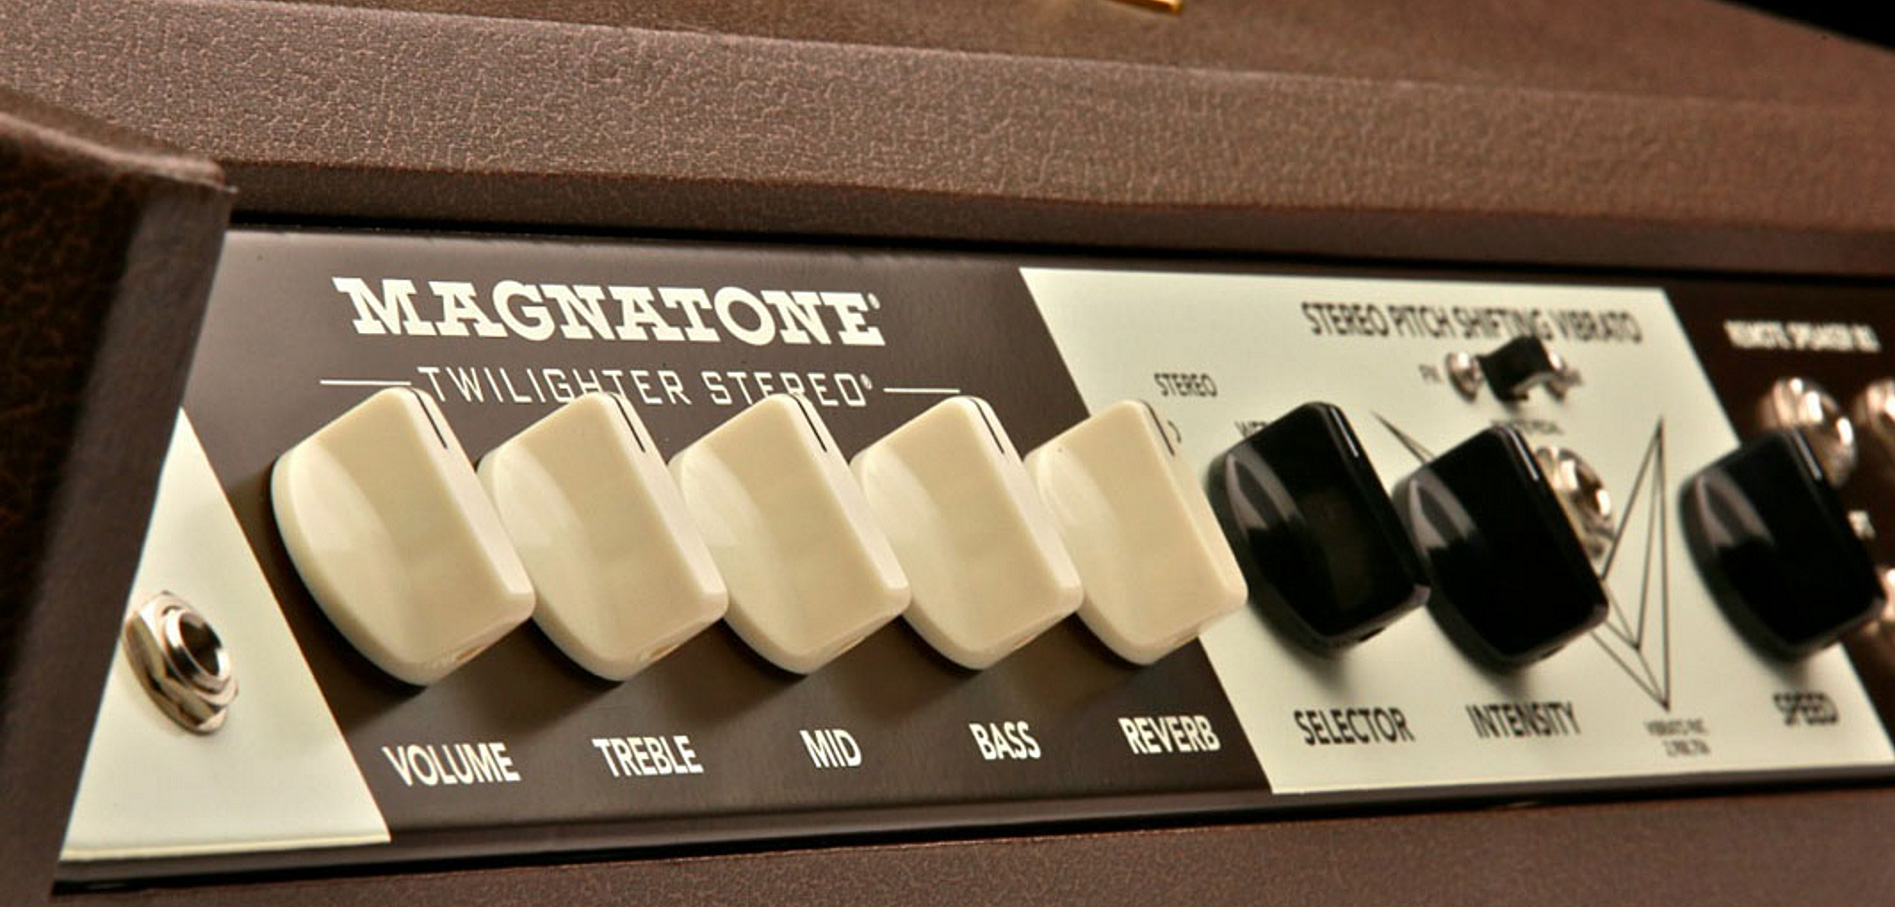 Magnatone Traditional Collection Twilighter Stereo 2x22w 2x12 - Ampli Guitare Électrique Combo - Variation 2